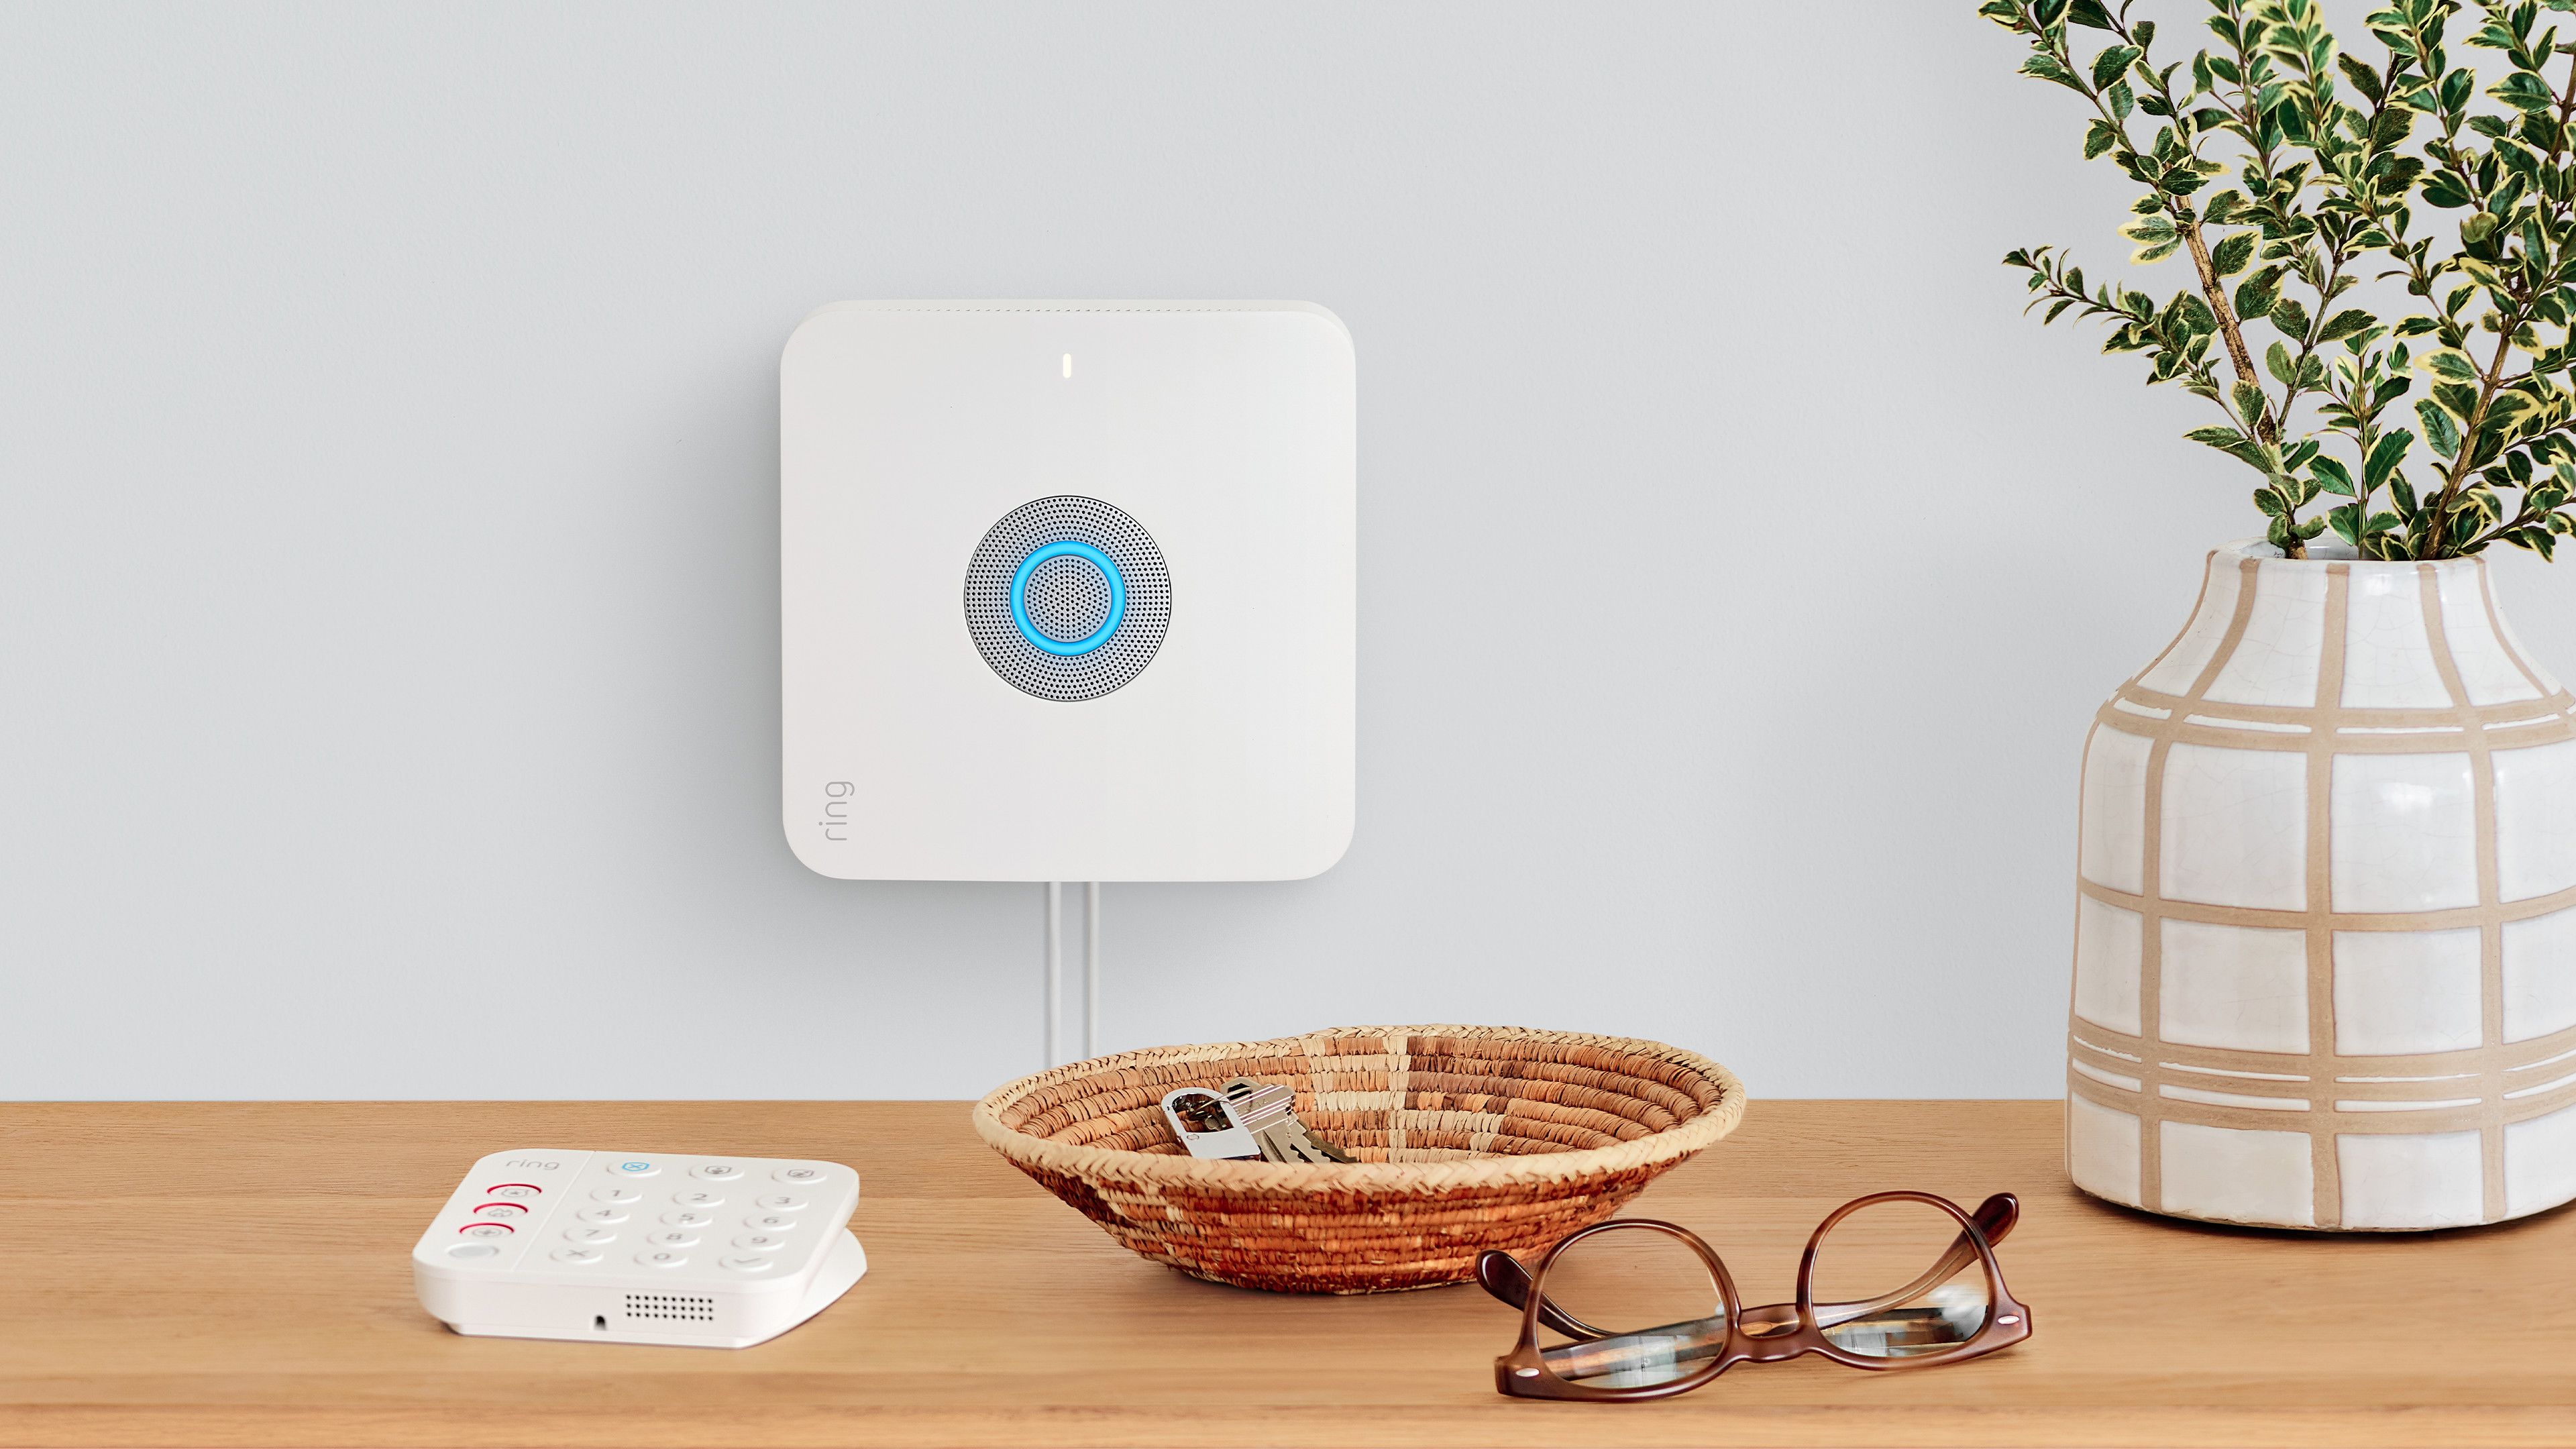 Ring Alarm is coming and it looks competitive 